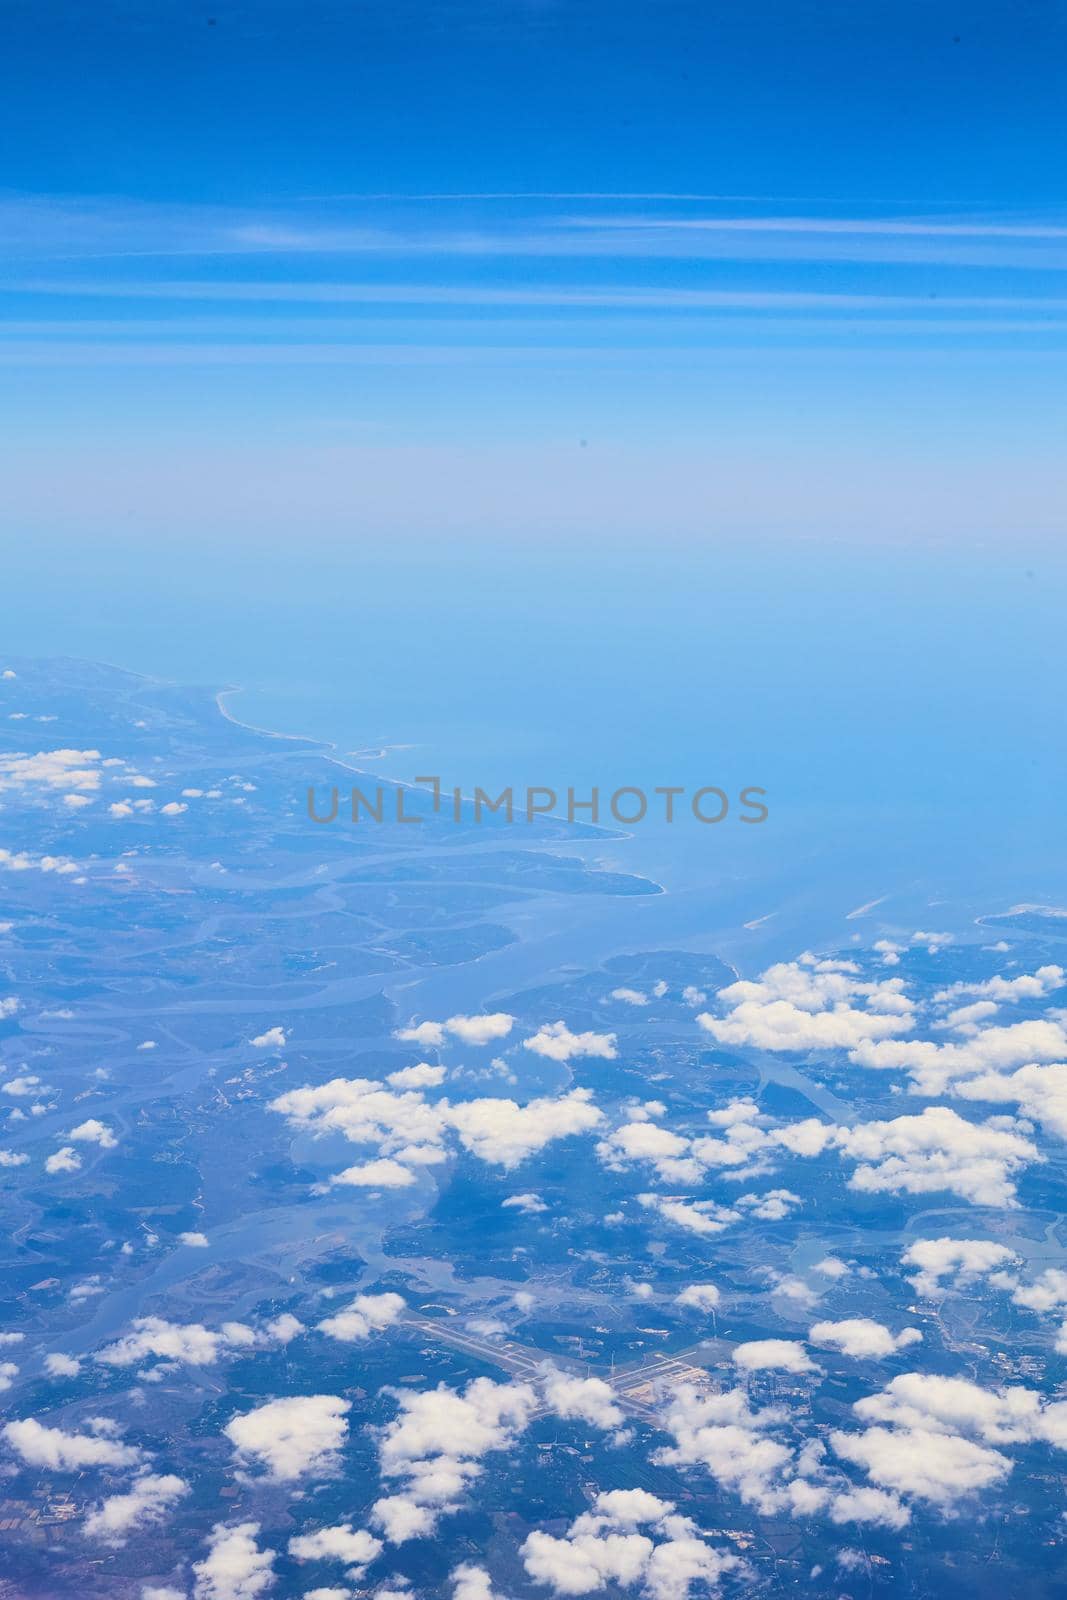 Image of Airplane view of clouds and blue sky with land in distance